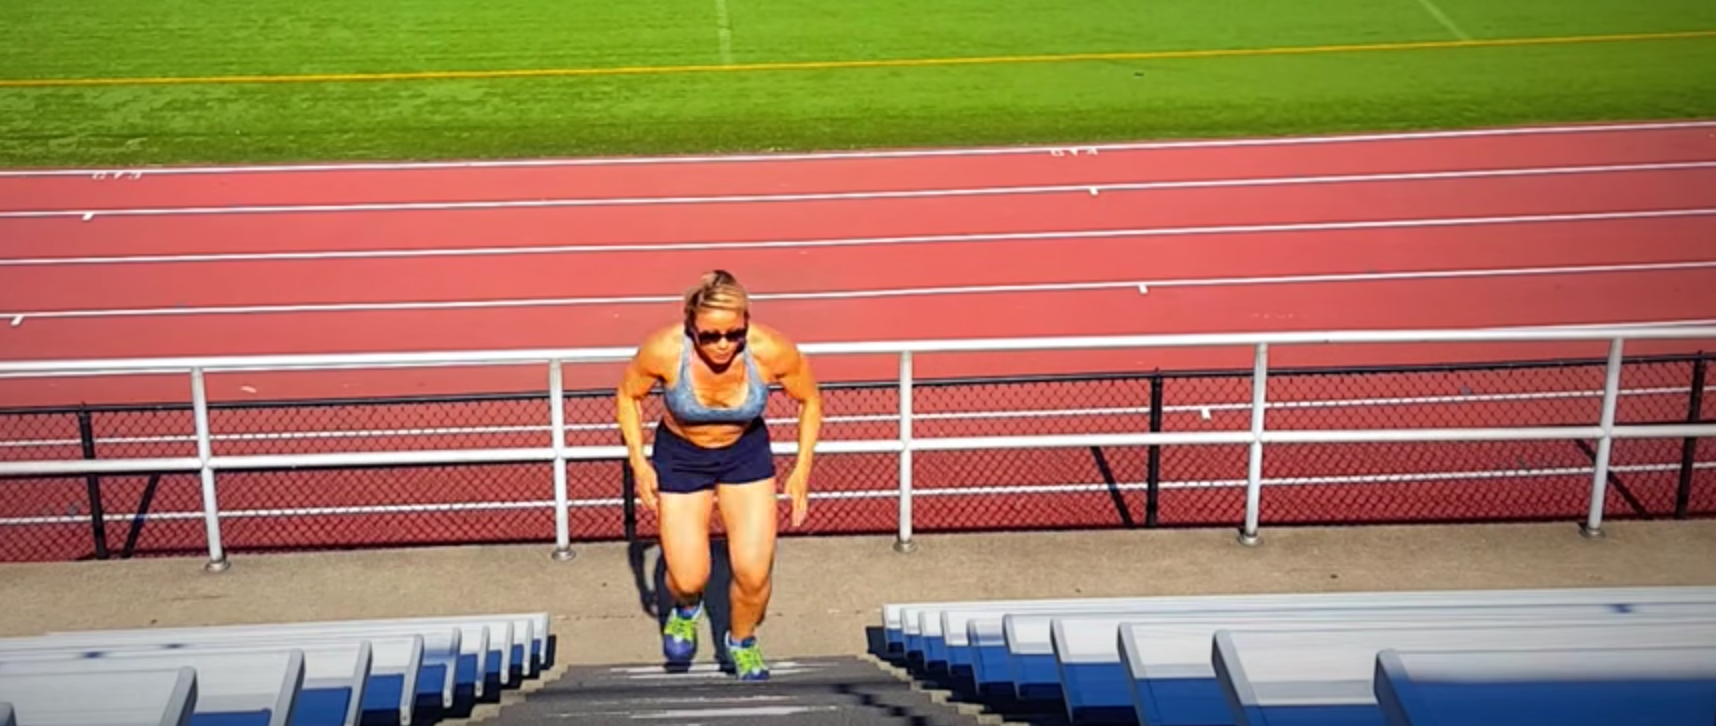 15 Minute Bleacher Workout Benefits for Build Muscle